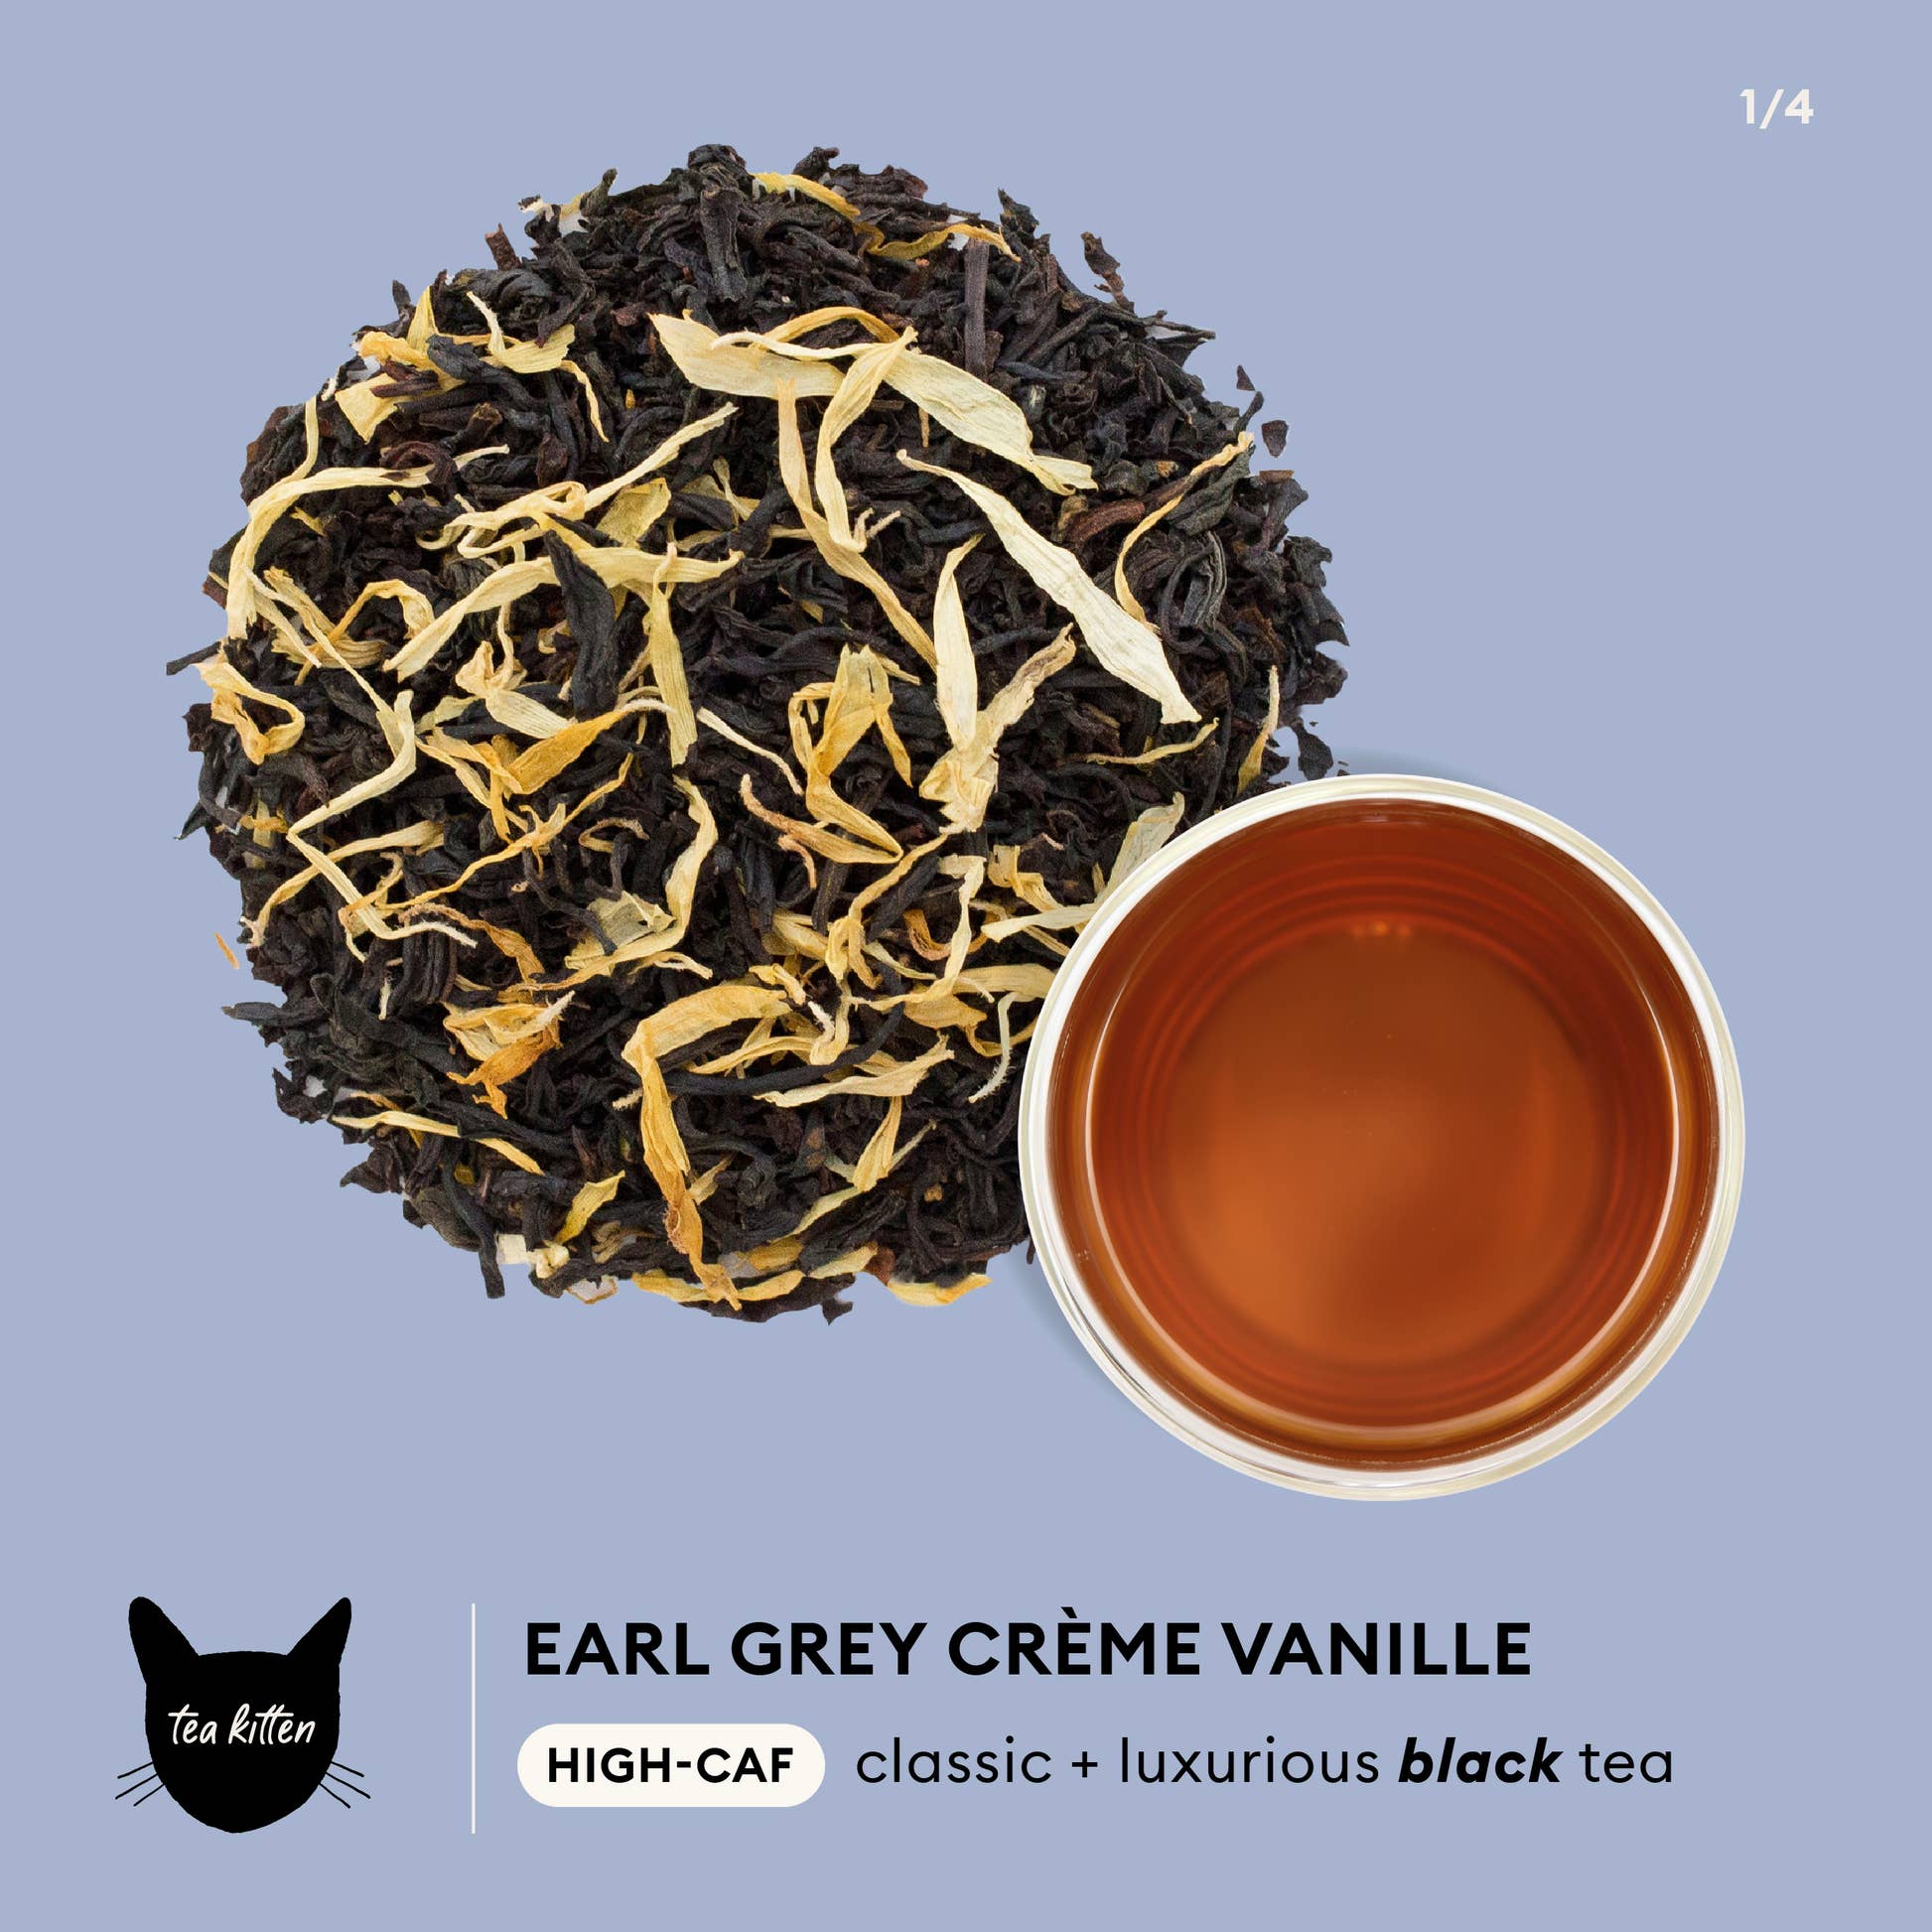 Earl Grey Creme Vanille by Tea Kitten Infographic - HIGH-CAF classic + luxurious black tea